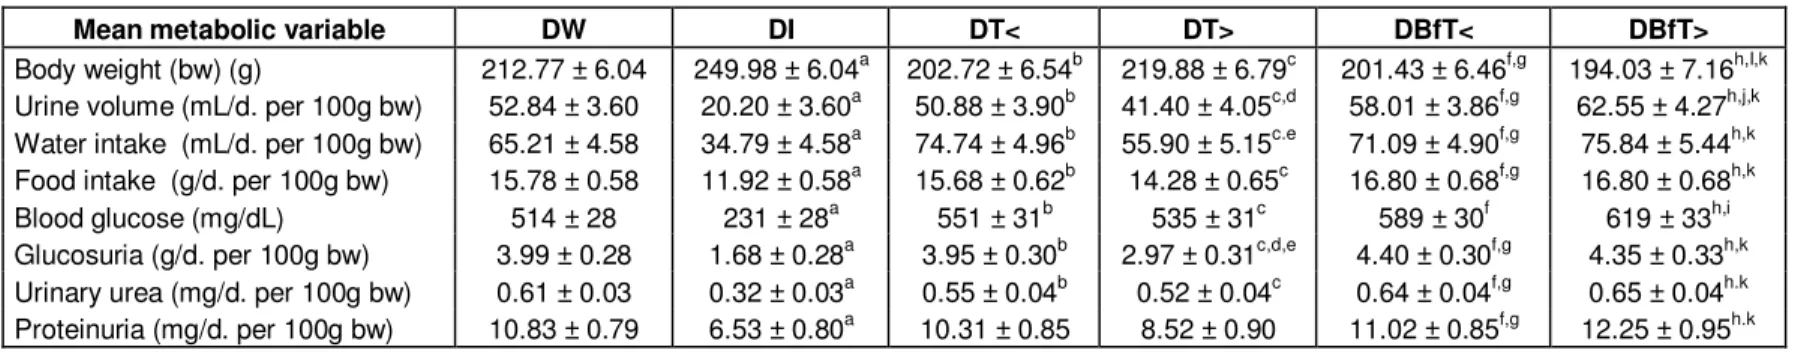 Table 1. Mean metabolic variables of diabetic rats during 35-day treatment with Bauhinia forficata leaf extract dried in a spouted bed (BfT)